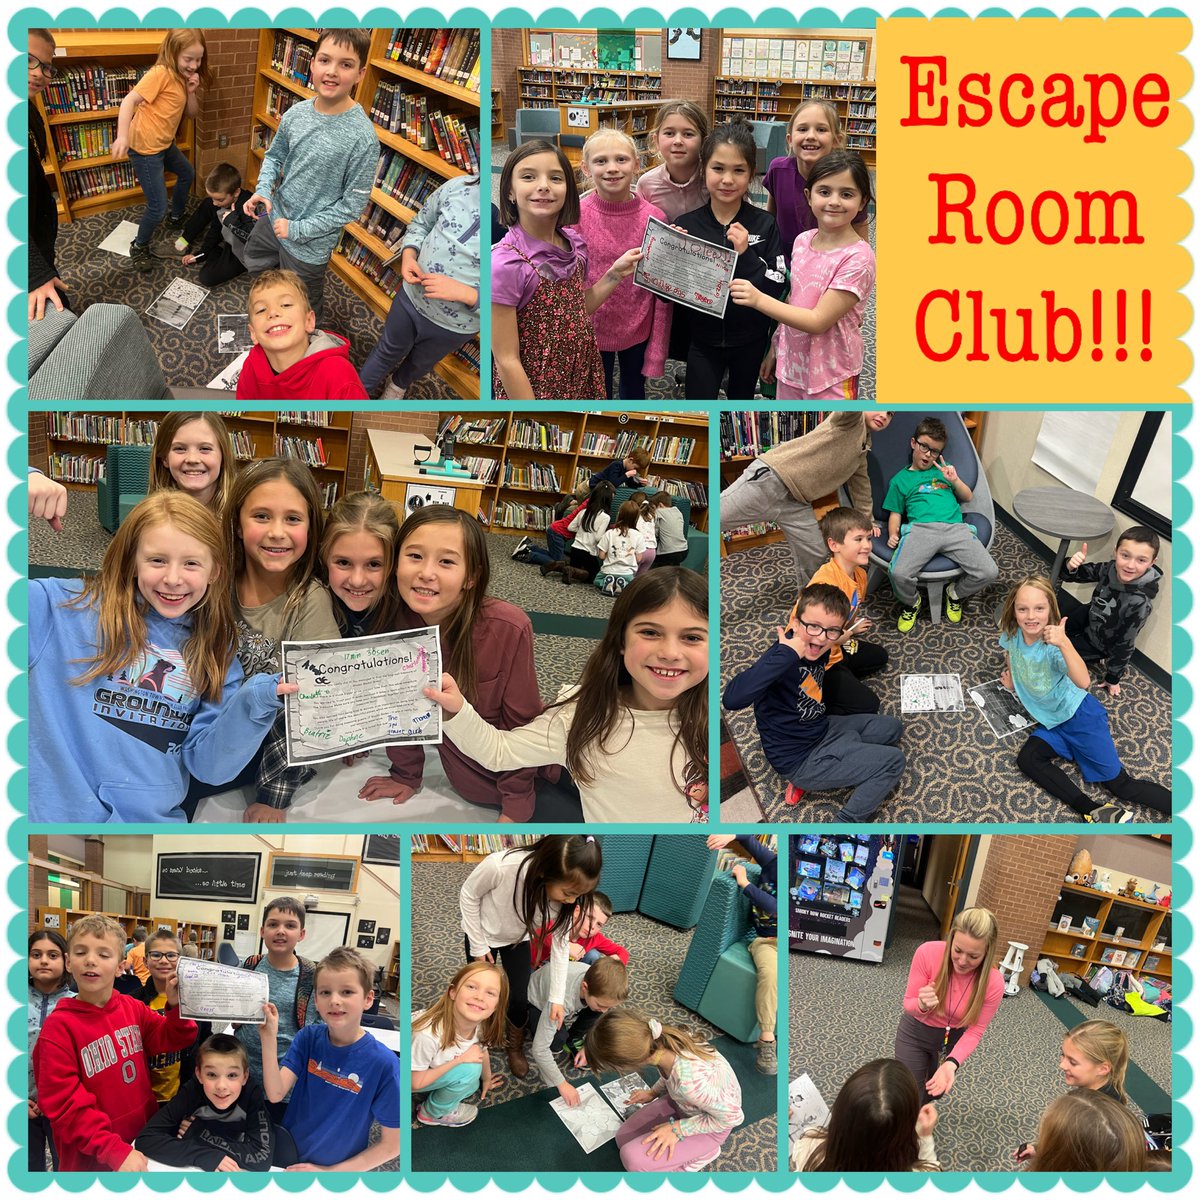 Had the best time at Escape Room Club today!! Top time was 17 minutes to break out! 🚀🚀🚀 Yay Enrichment Clubs!!